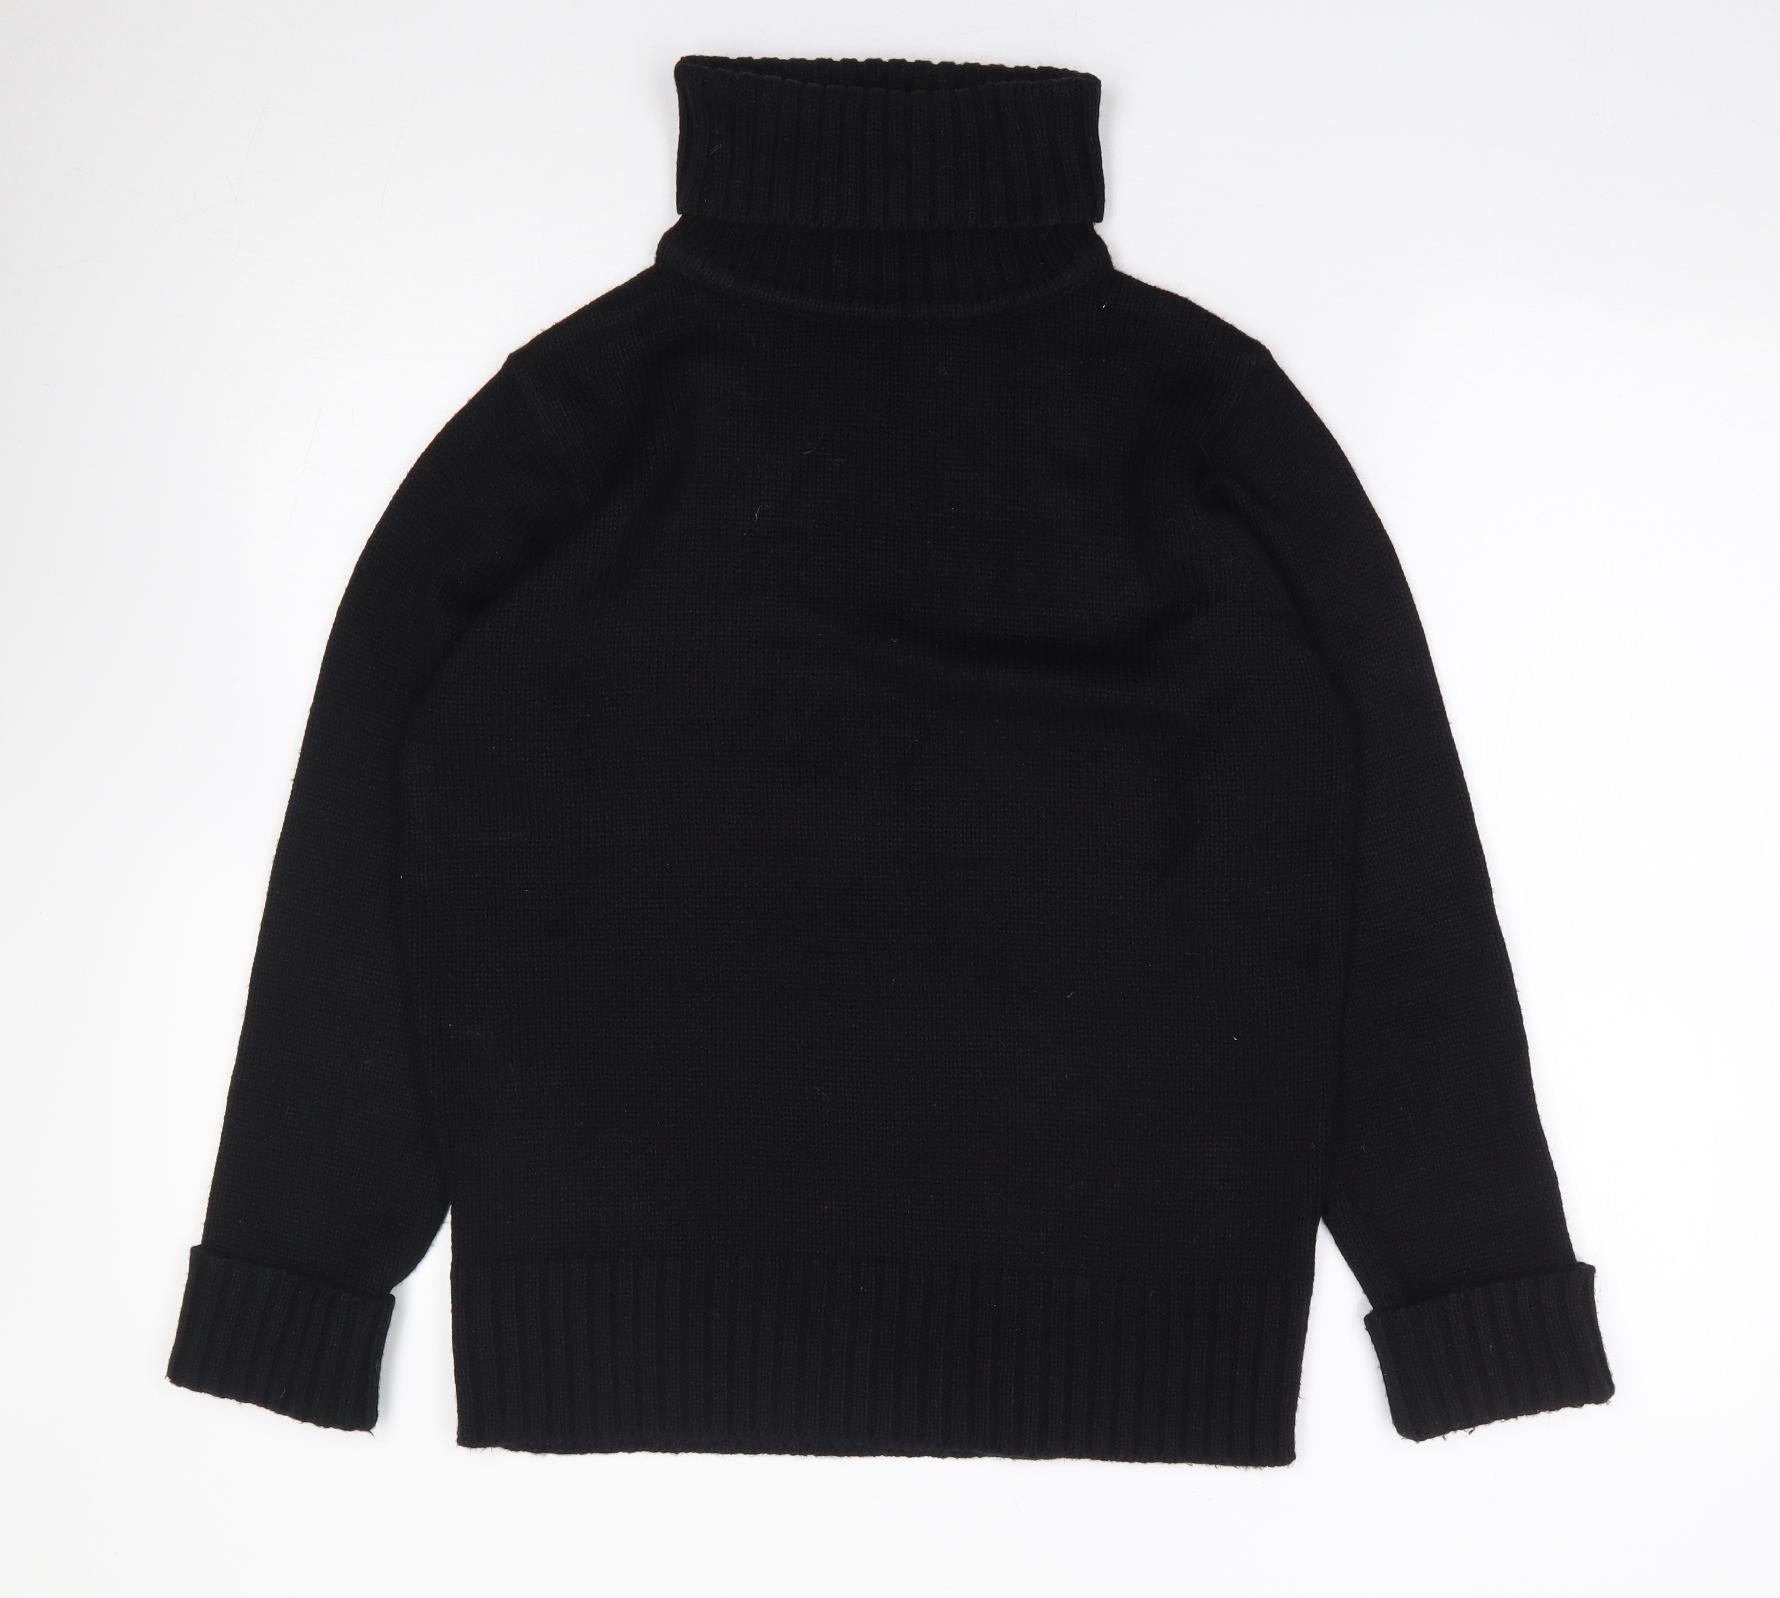 NEXT Womens Black Roll Neck Cotton Pullover Jumper Size 16, 47% OFF